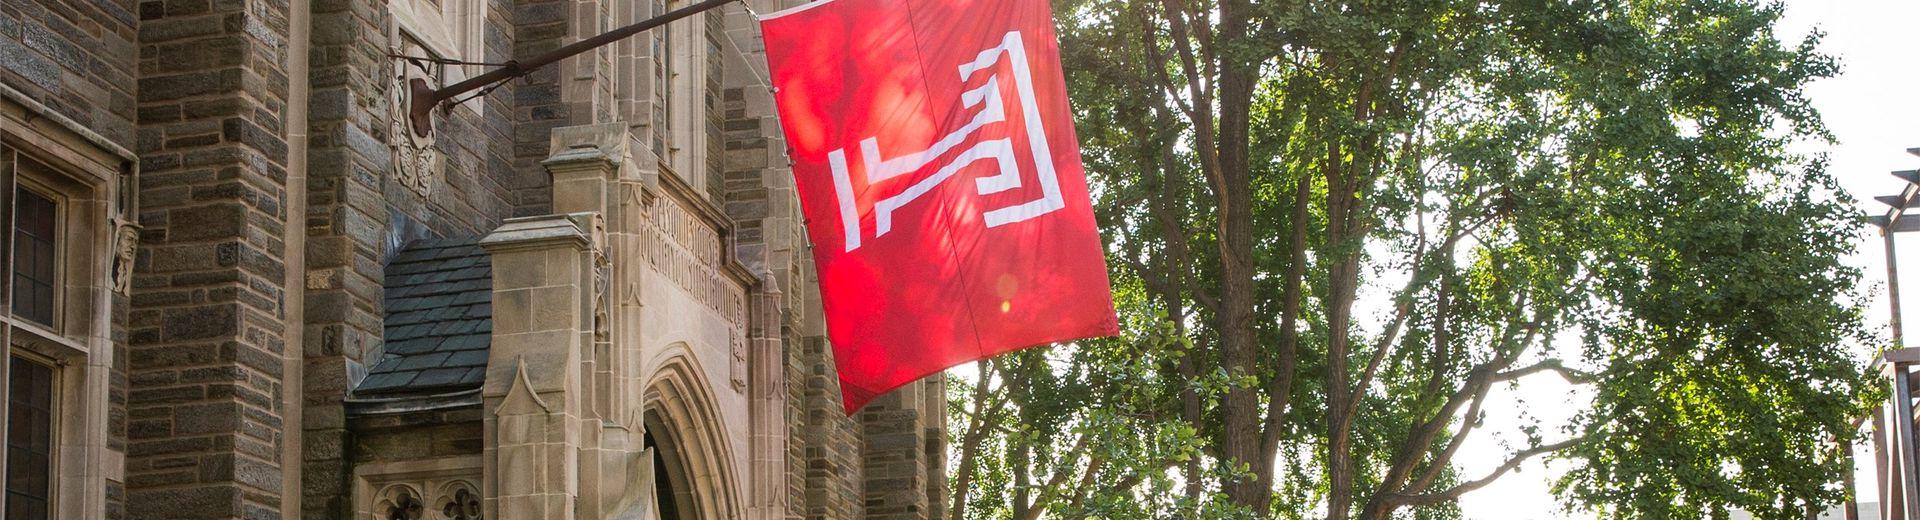 Temple University flag hangs from a historic building on campus.